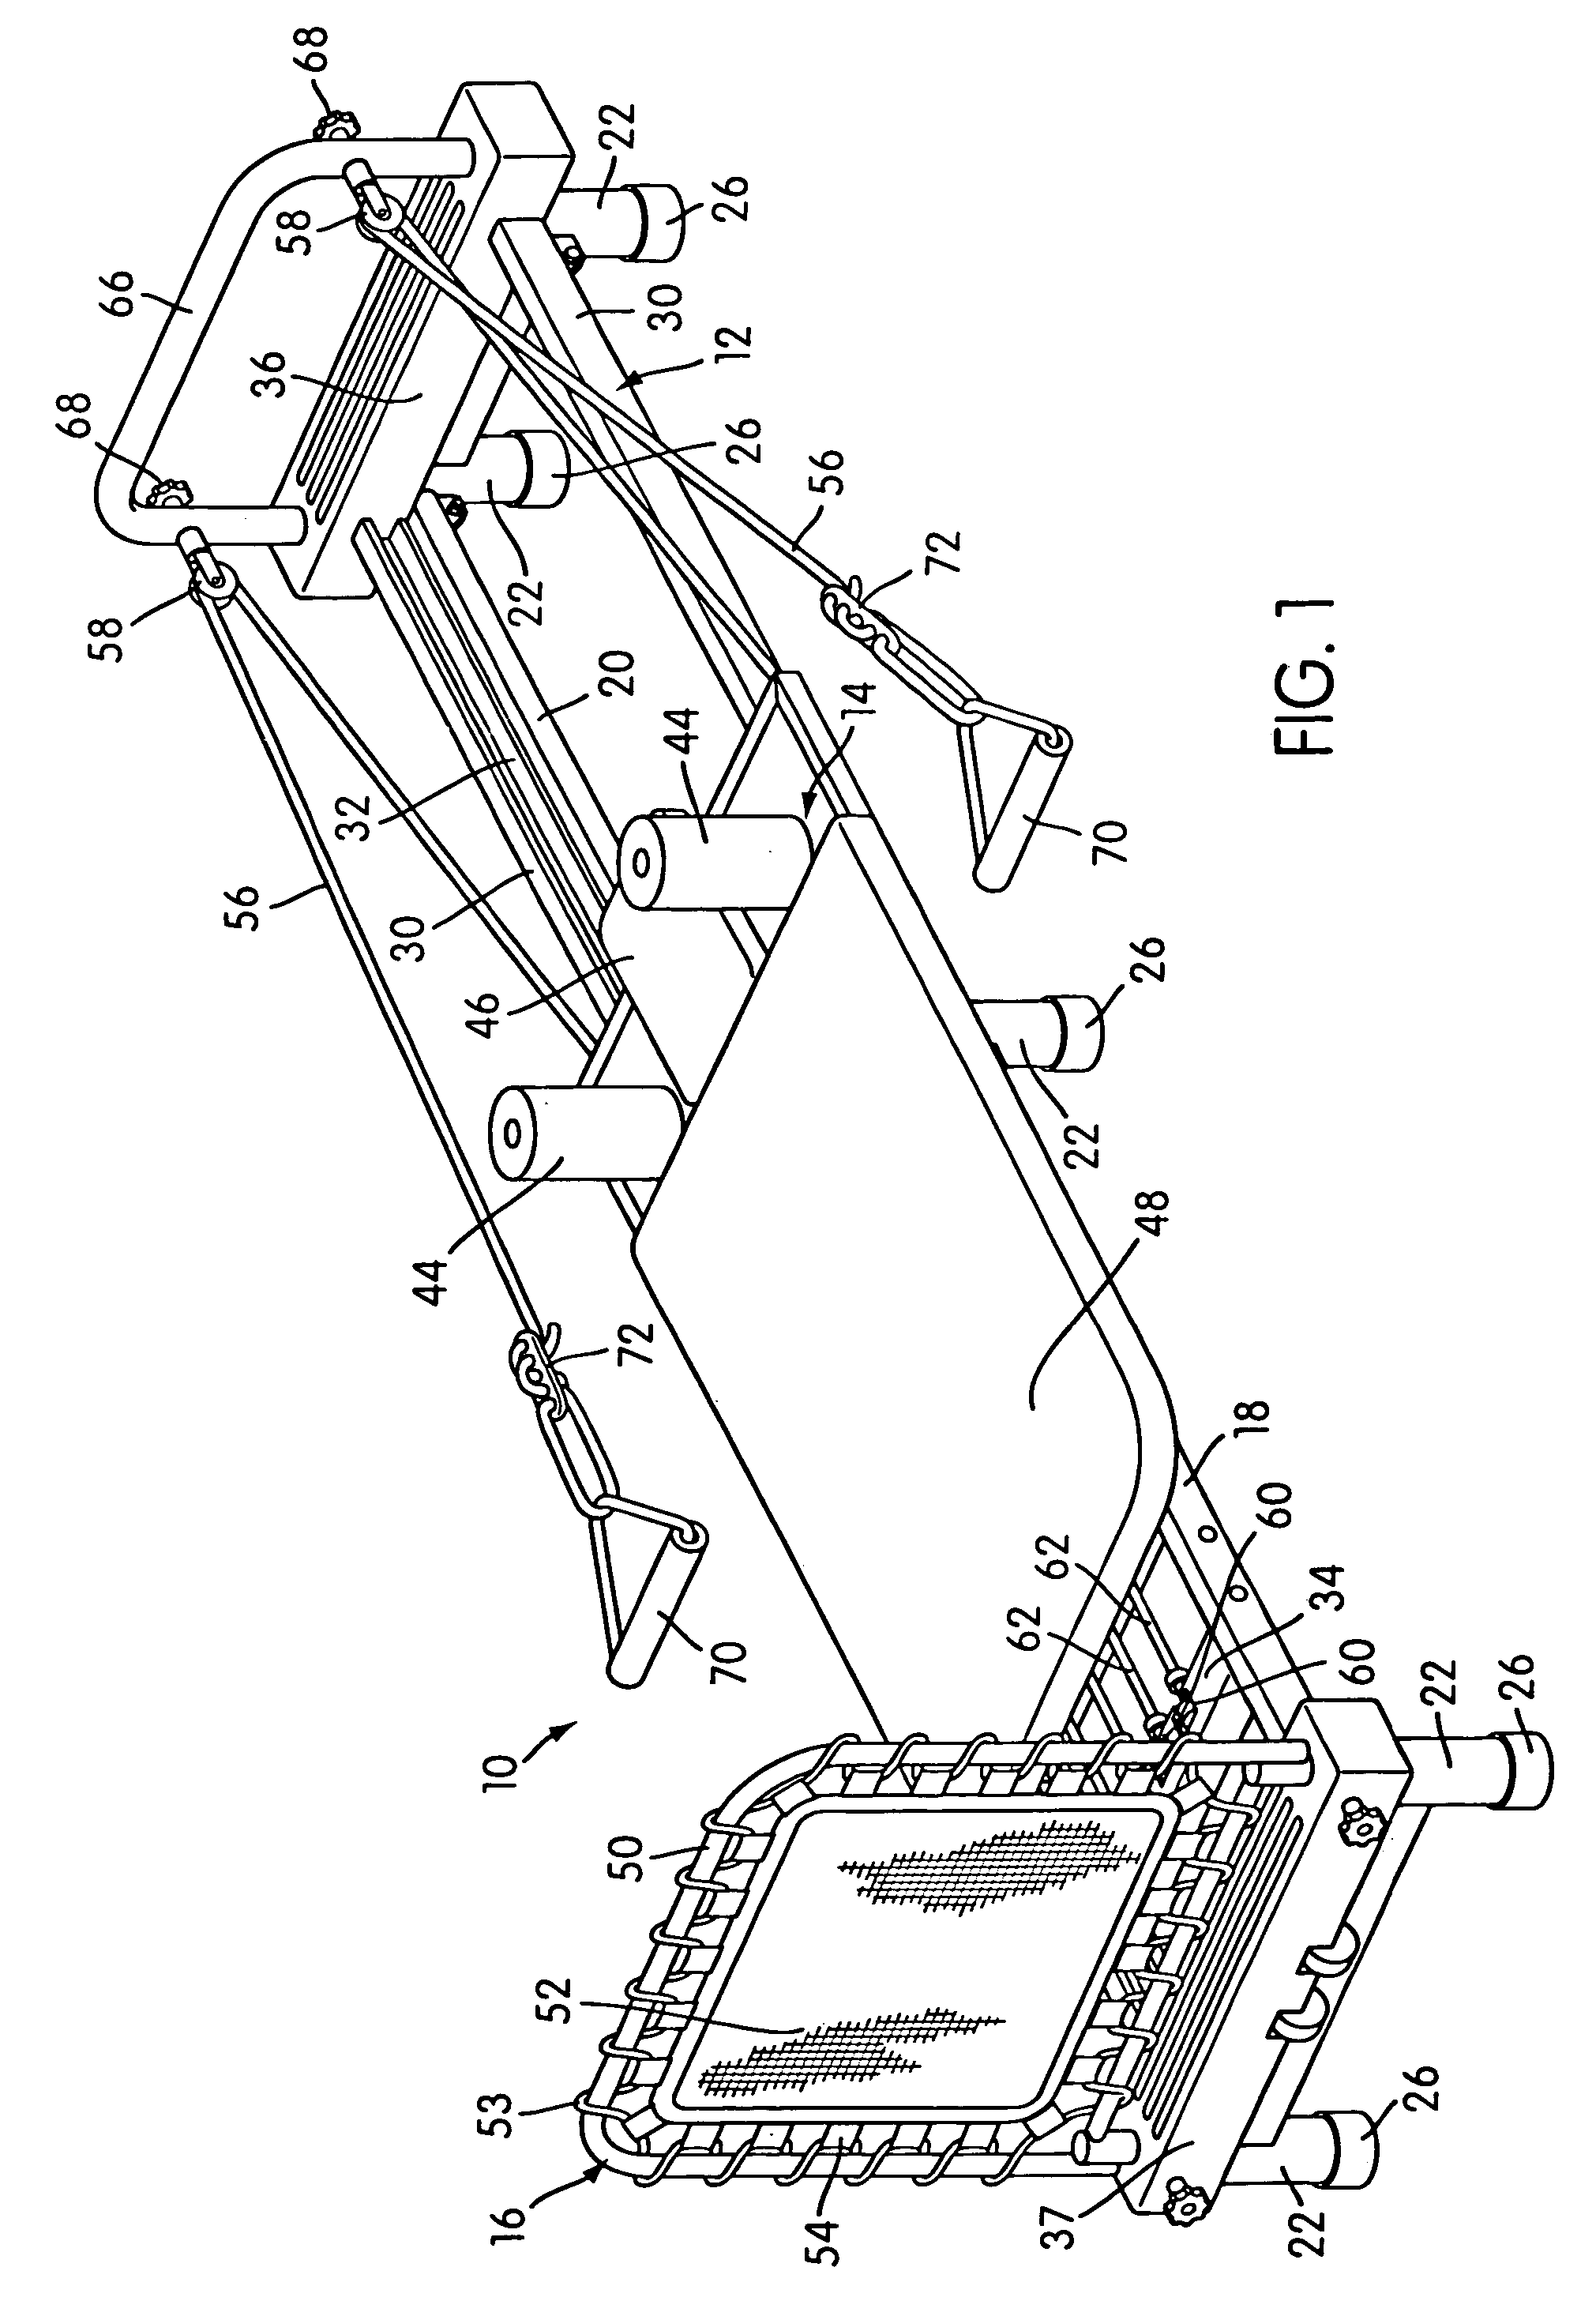 Exercise apparatus with resilient foot support